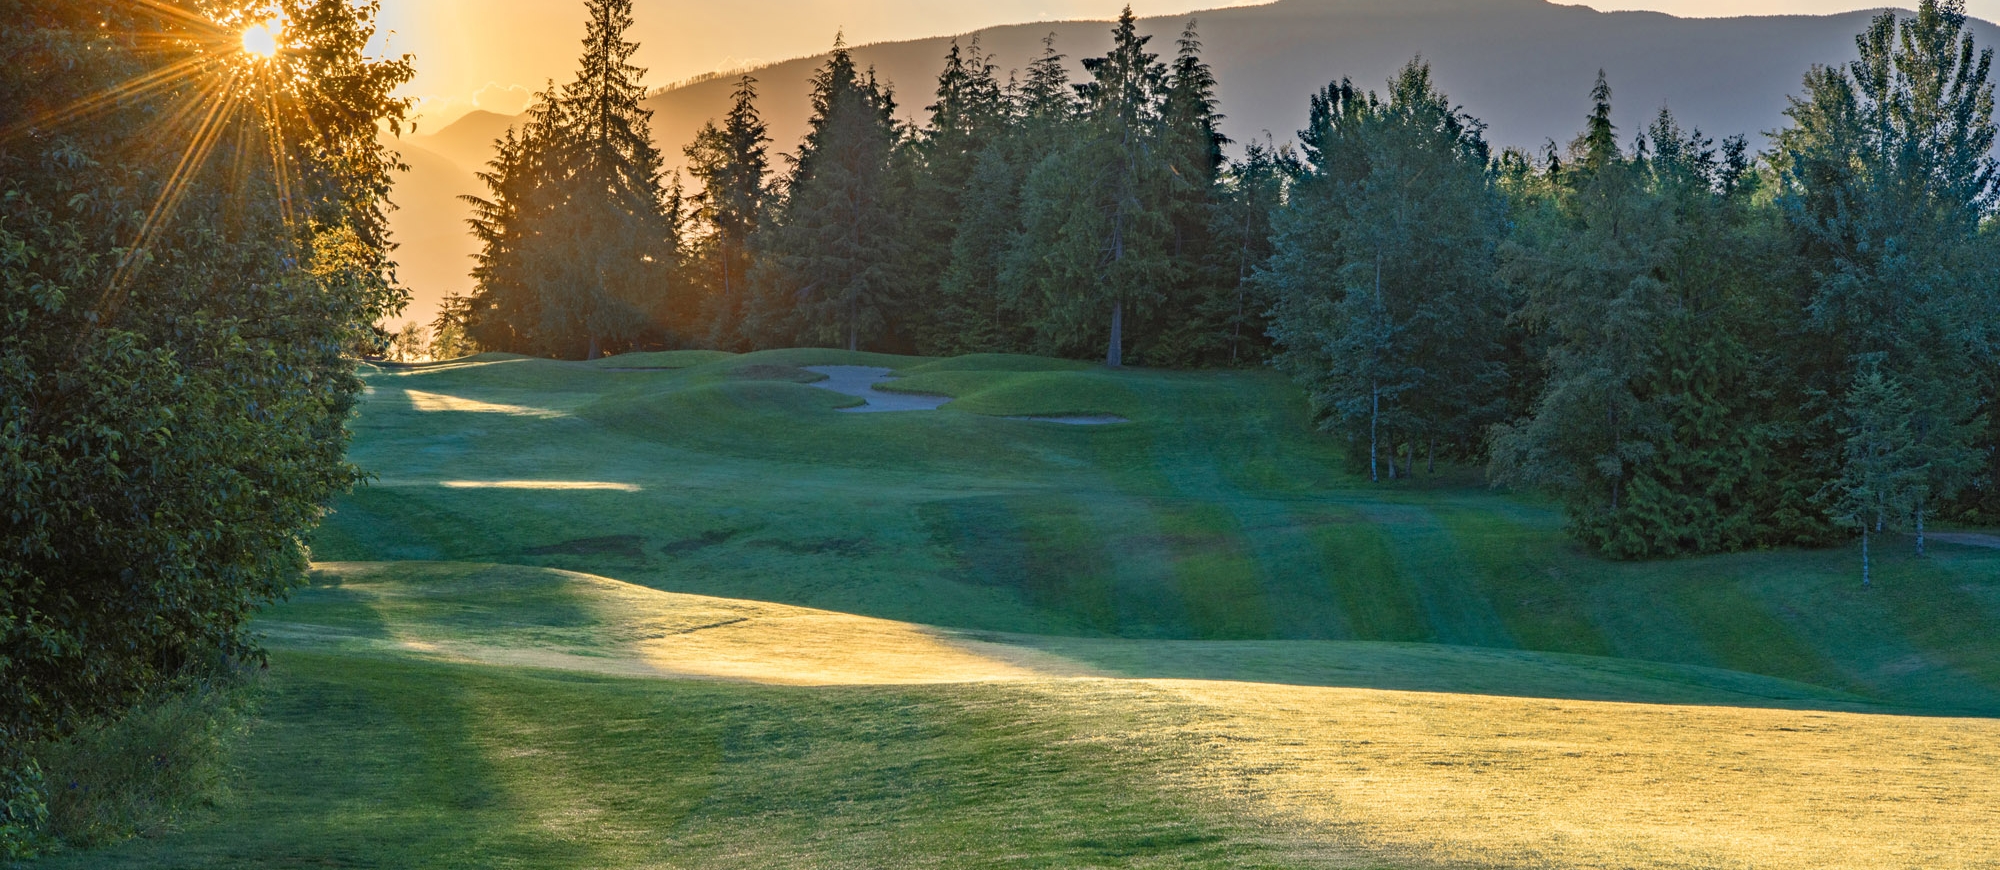 Balfour Golf Course at sunset, a golf course near Nelson BC and Balfour BC.